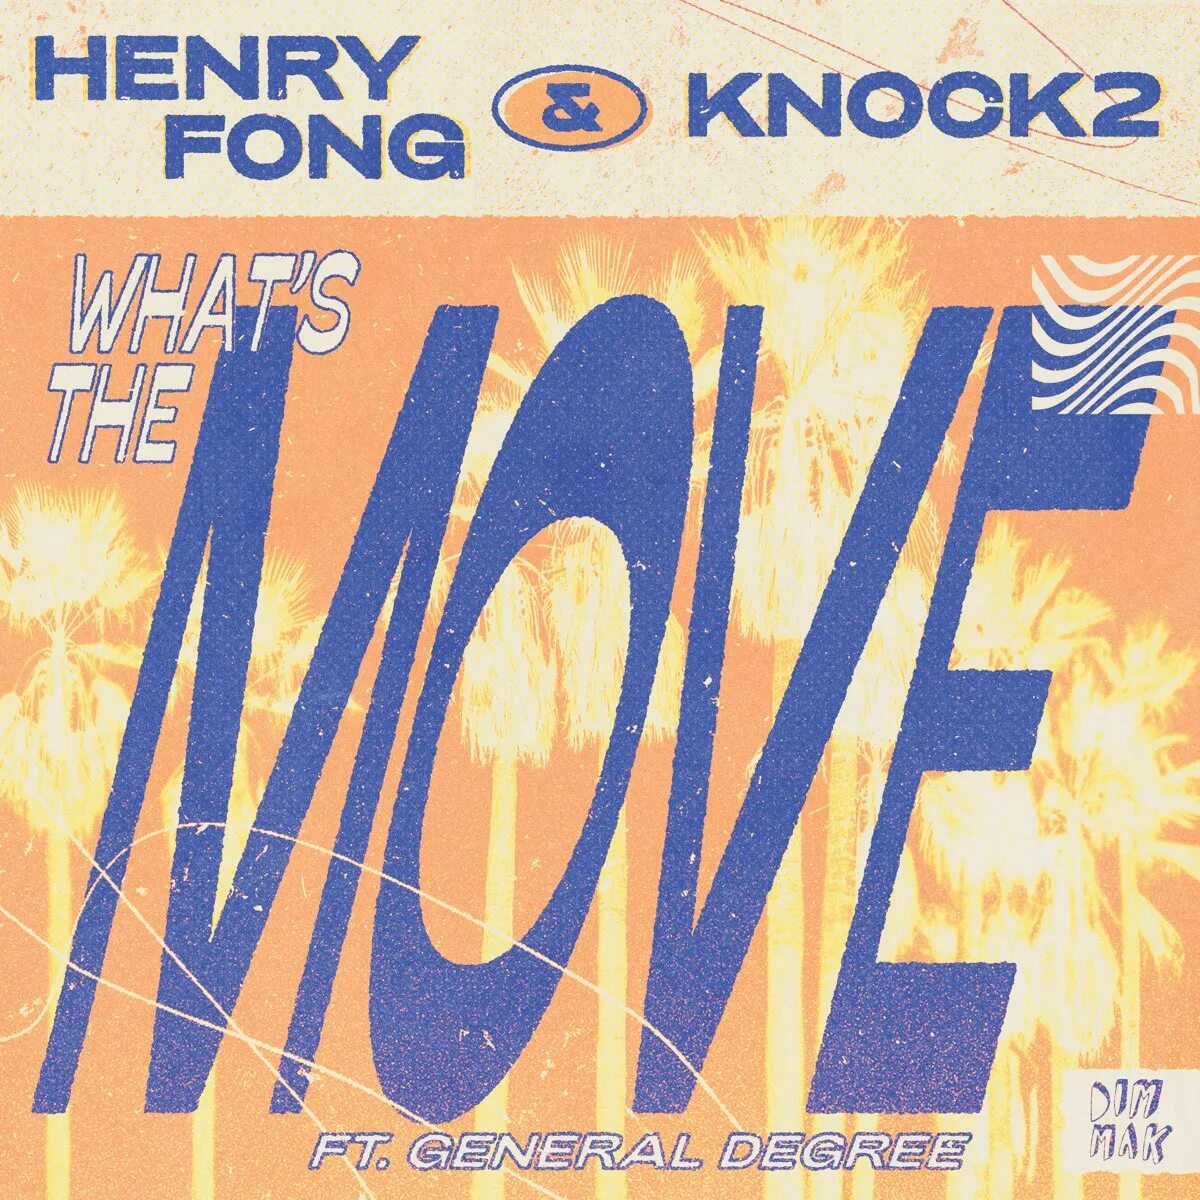 Knock two. Henry Fong, knock2 feat. General degree - what's the move. I wanna JSTJR, Henry Fong. On the move (feat. Strownlex & janfry).